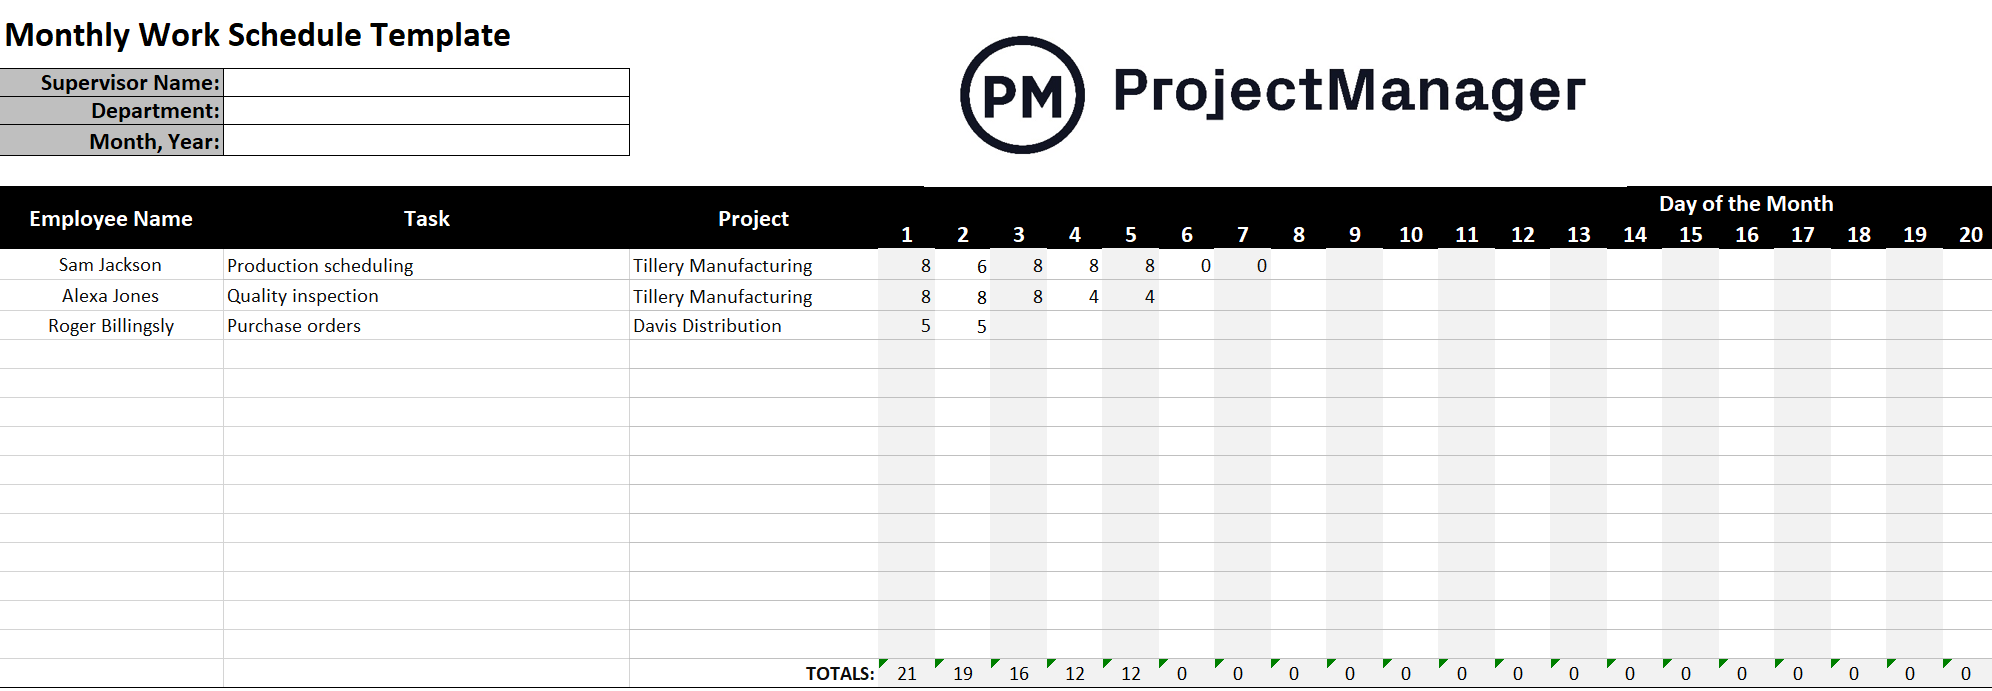 weekly-work-schedule-template-for-excel-projectmanager-atelier-yuwa